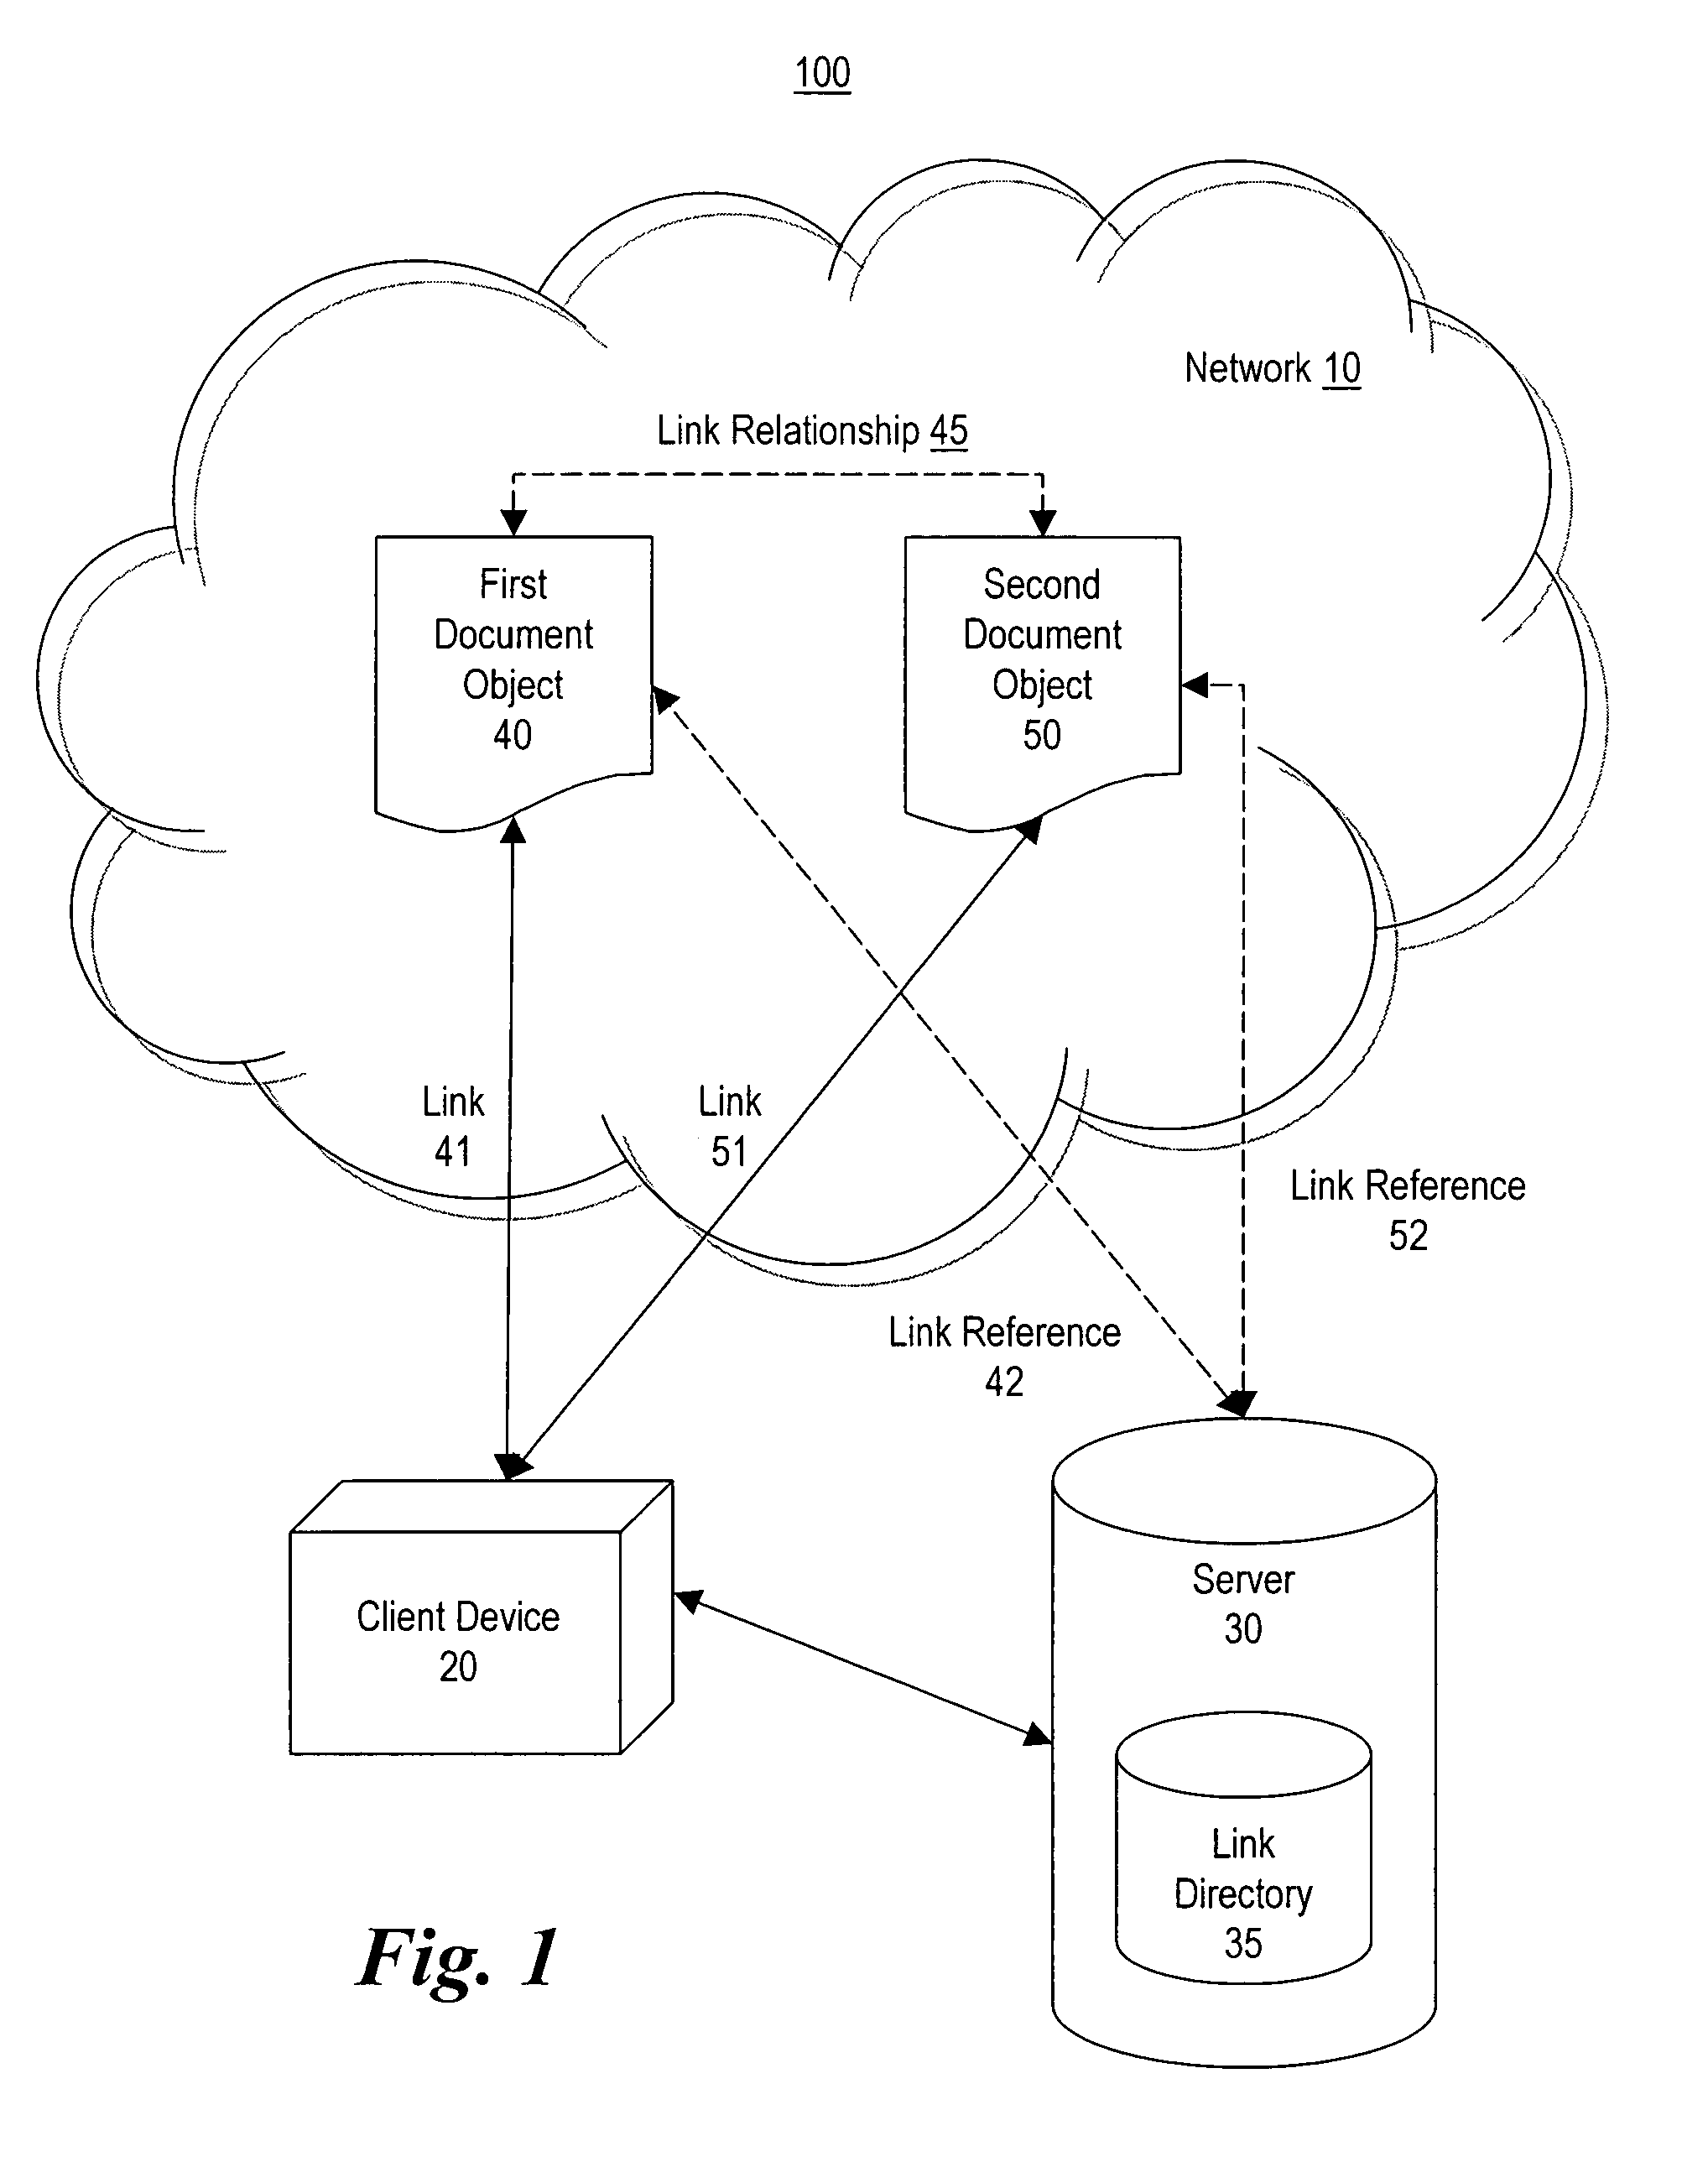 Method and system for making document objects available to users of a network